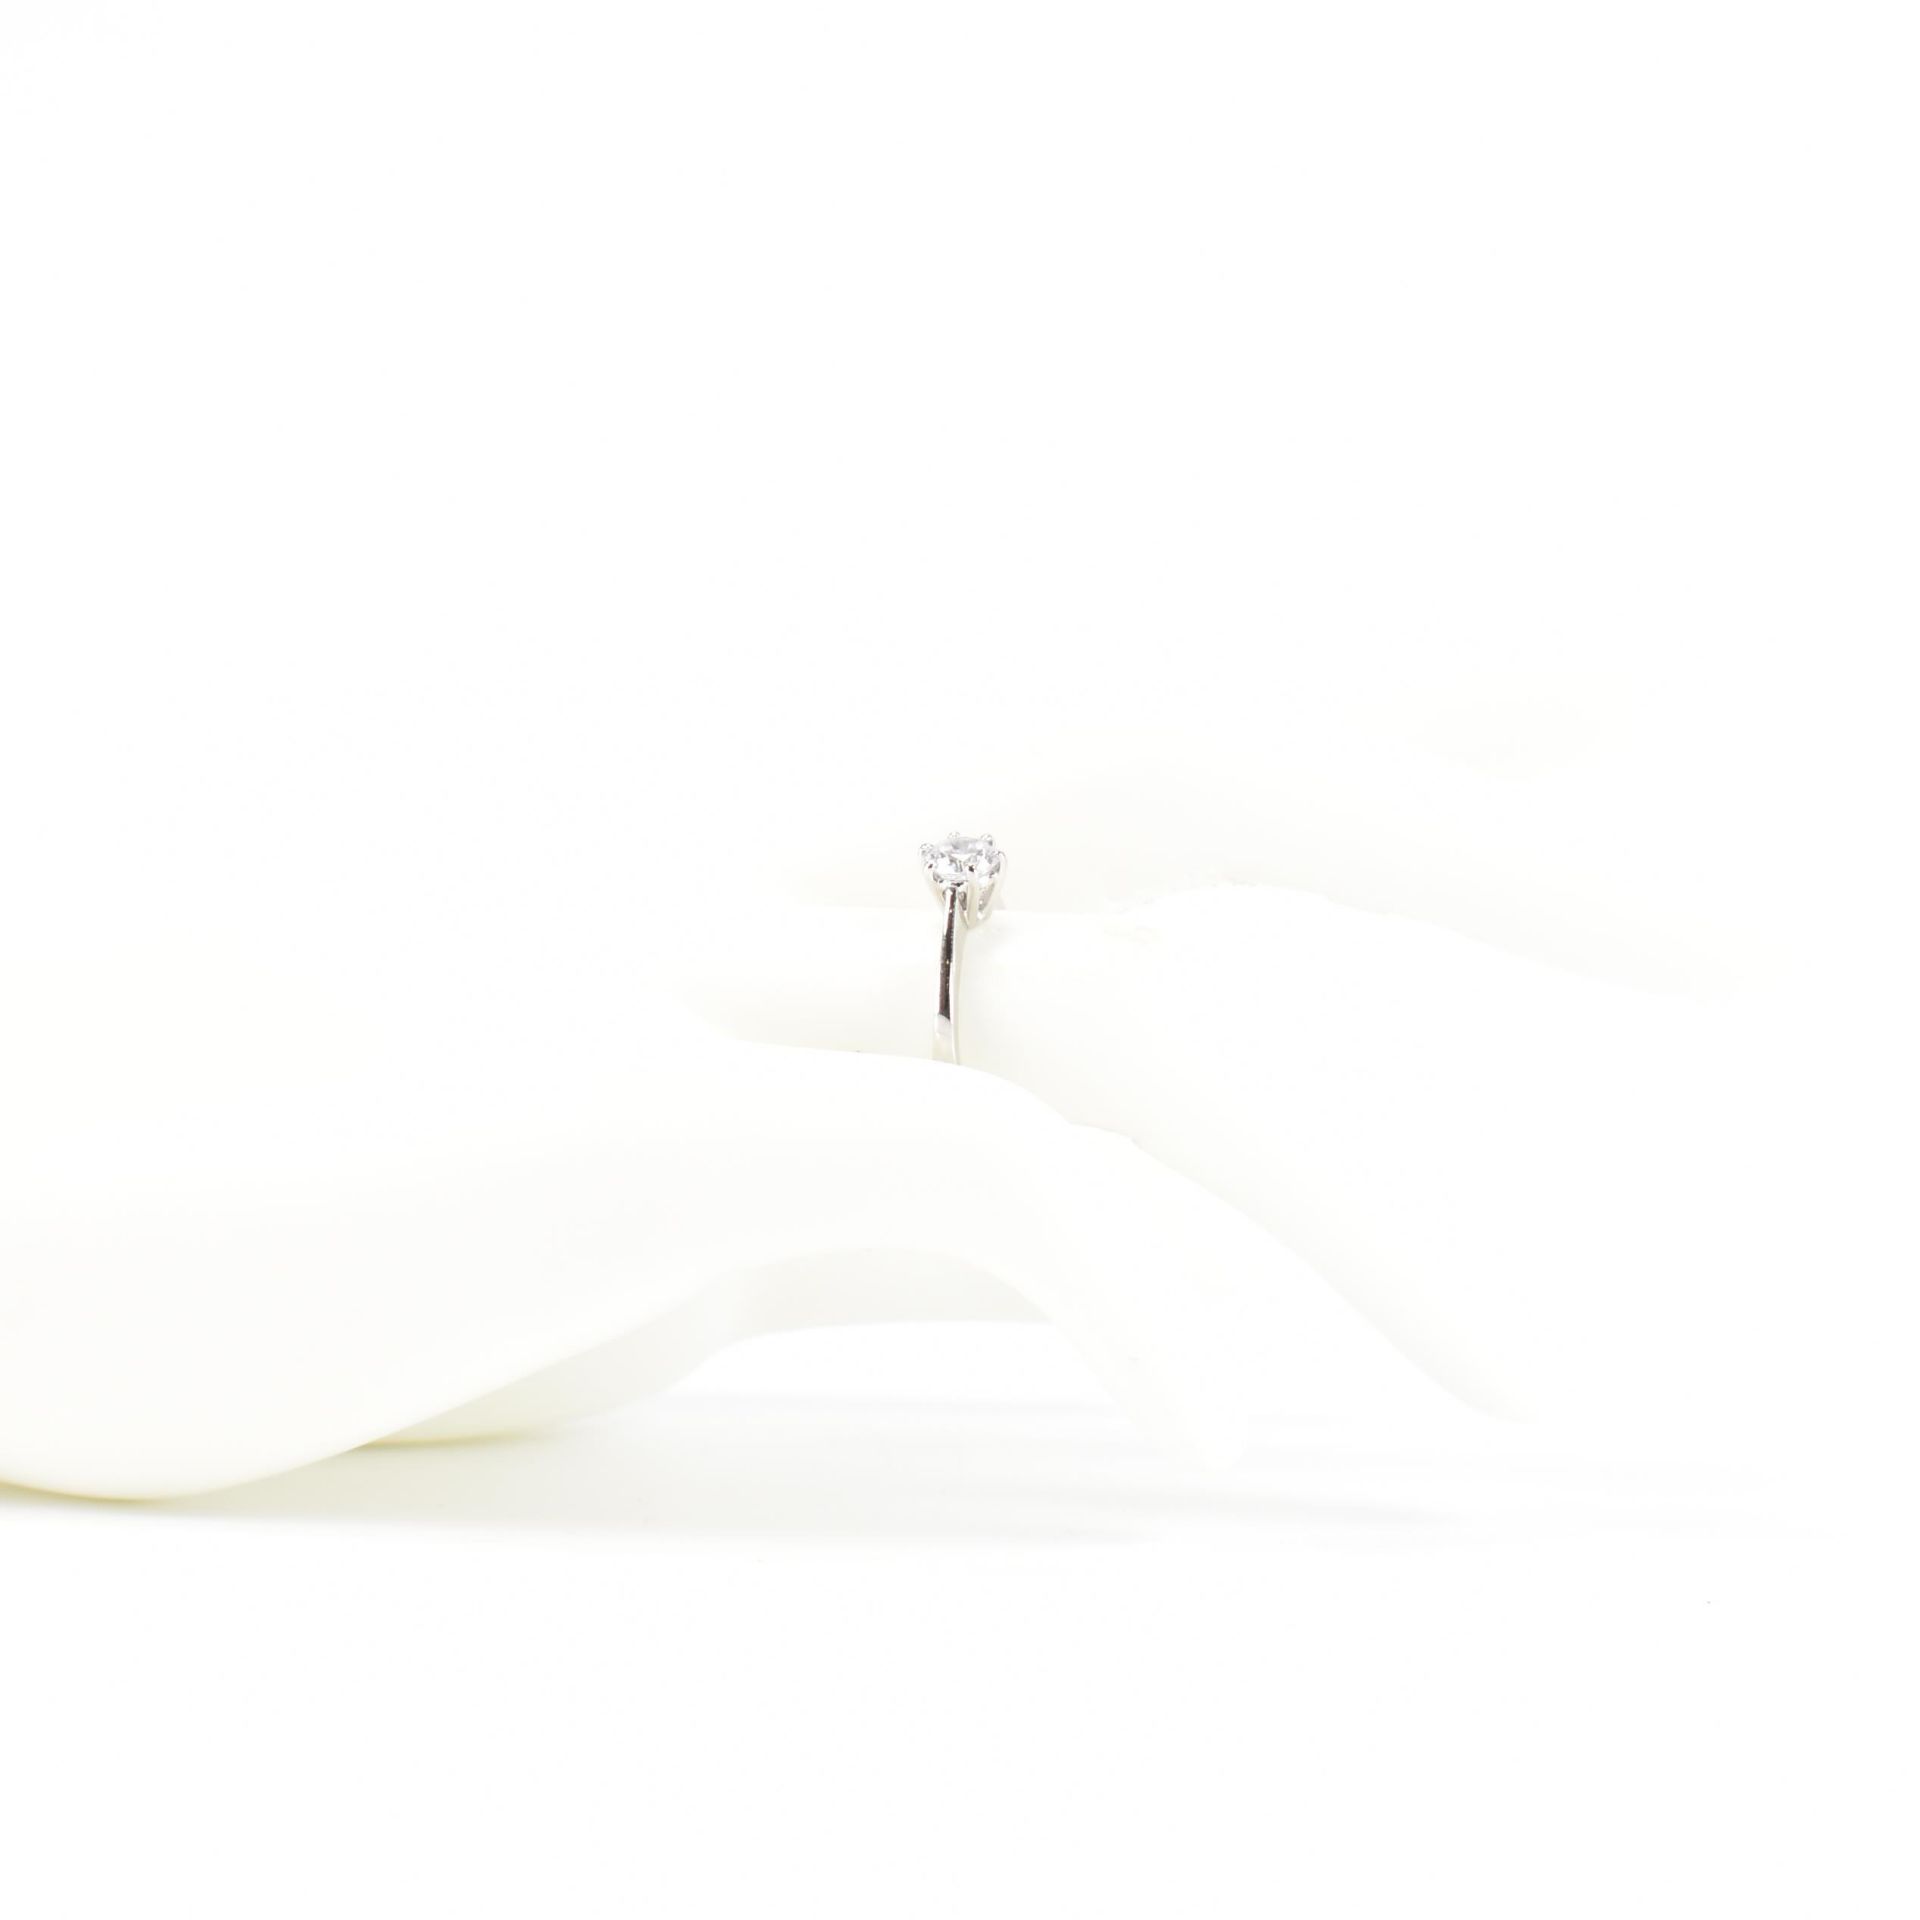 HALLMARKED 18CT GOLD & CZ SOLITAIRE RING - Image 6 of 6